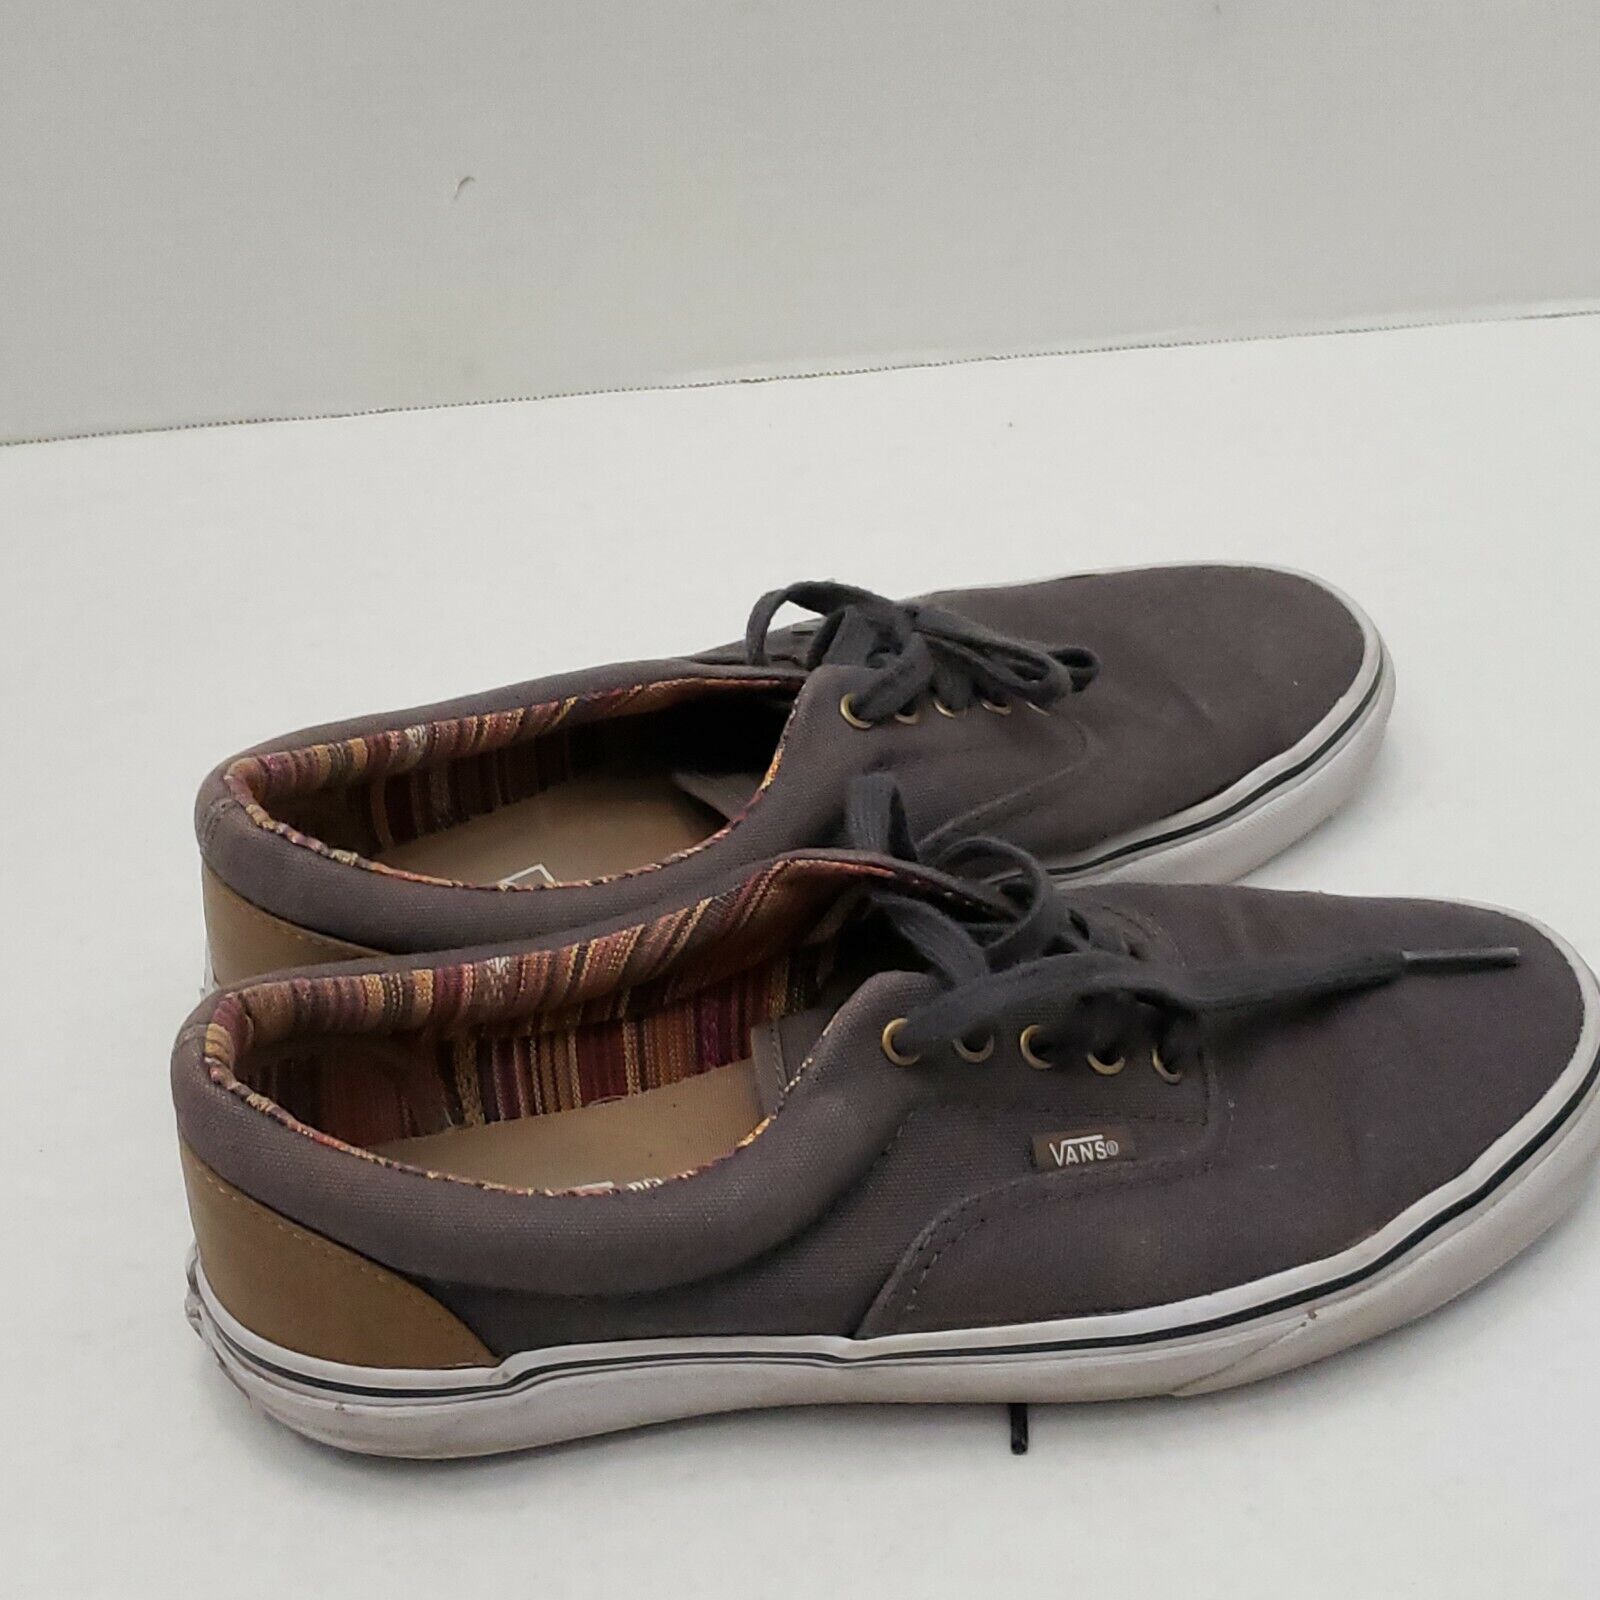 Vans Low Top Gray Men Flat Shoes 9.5 online Cash special price shopping Off Wall Lace the Up